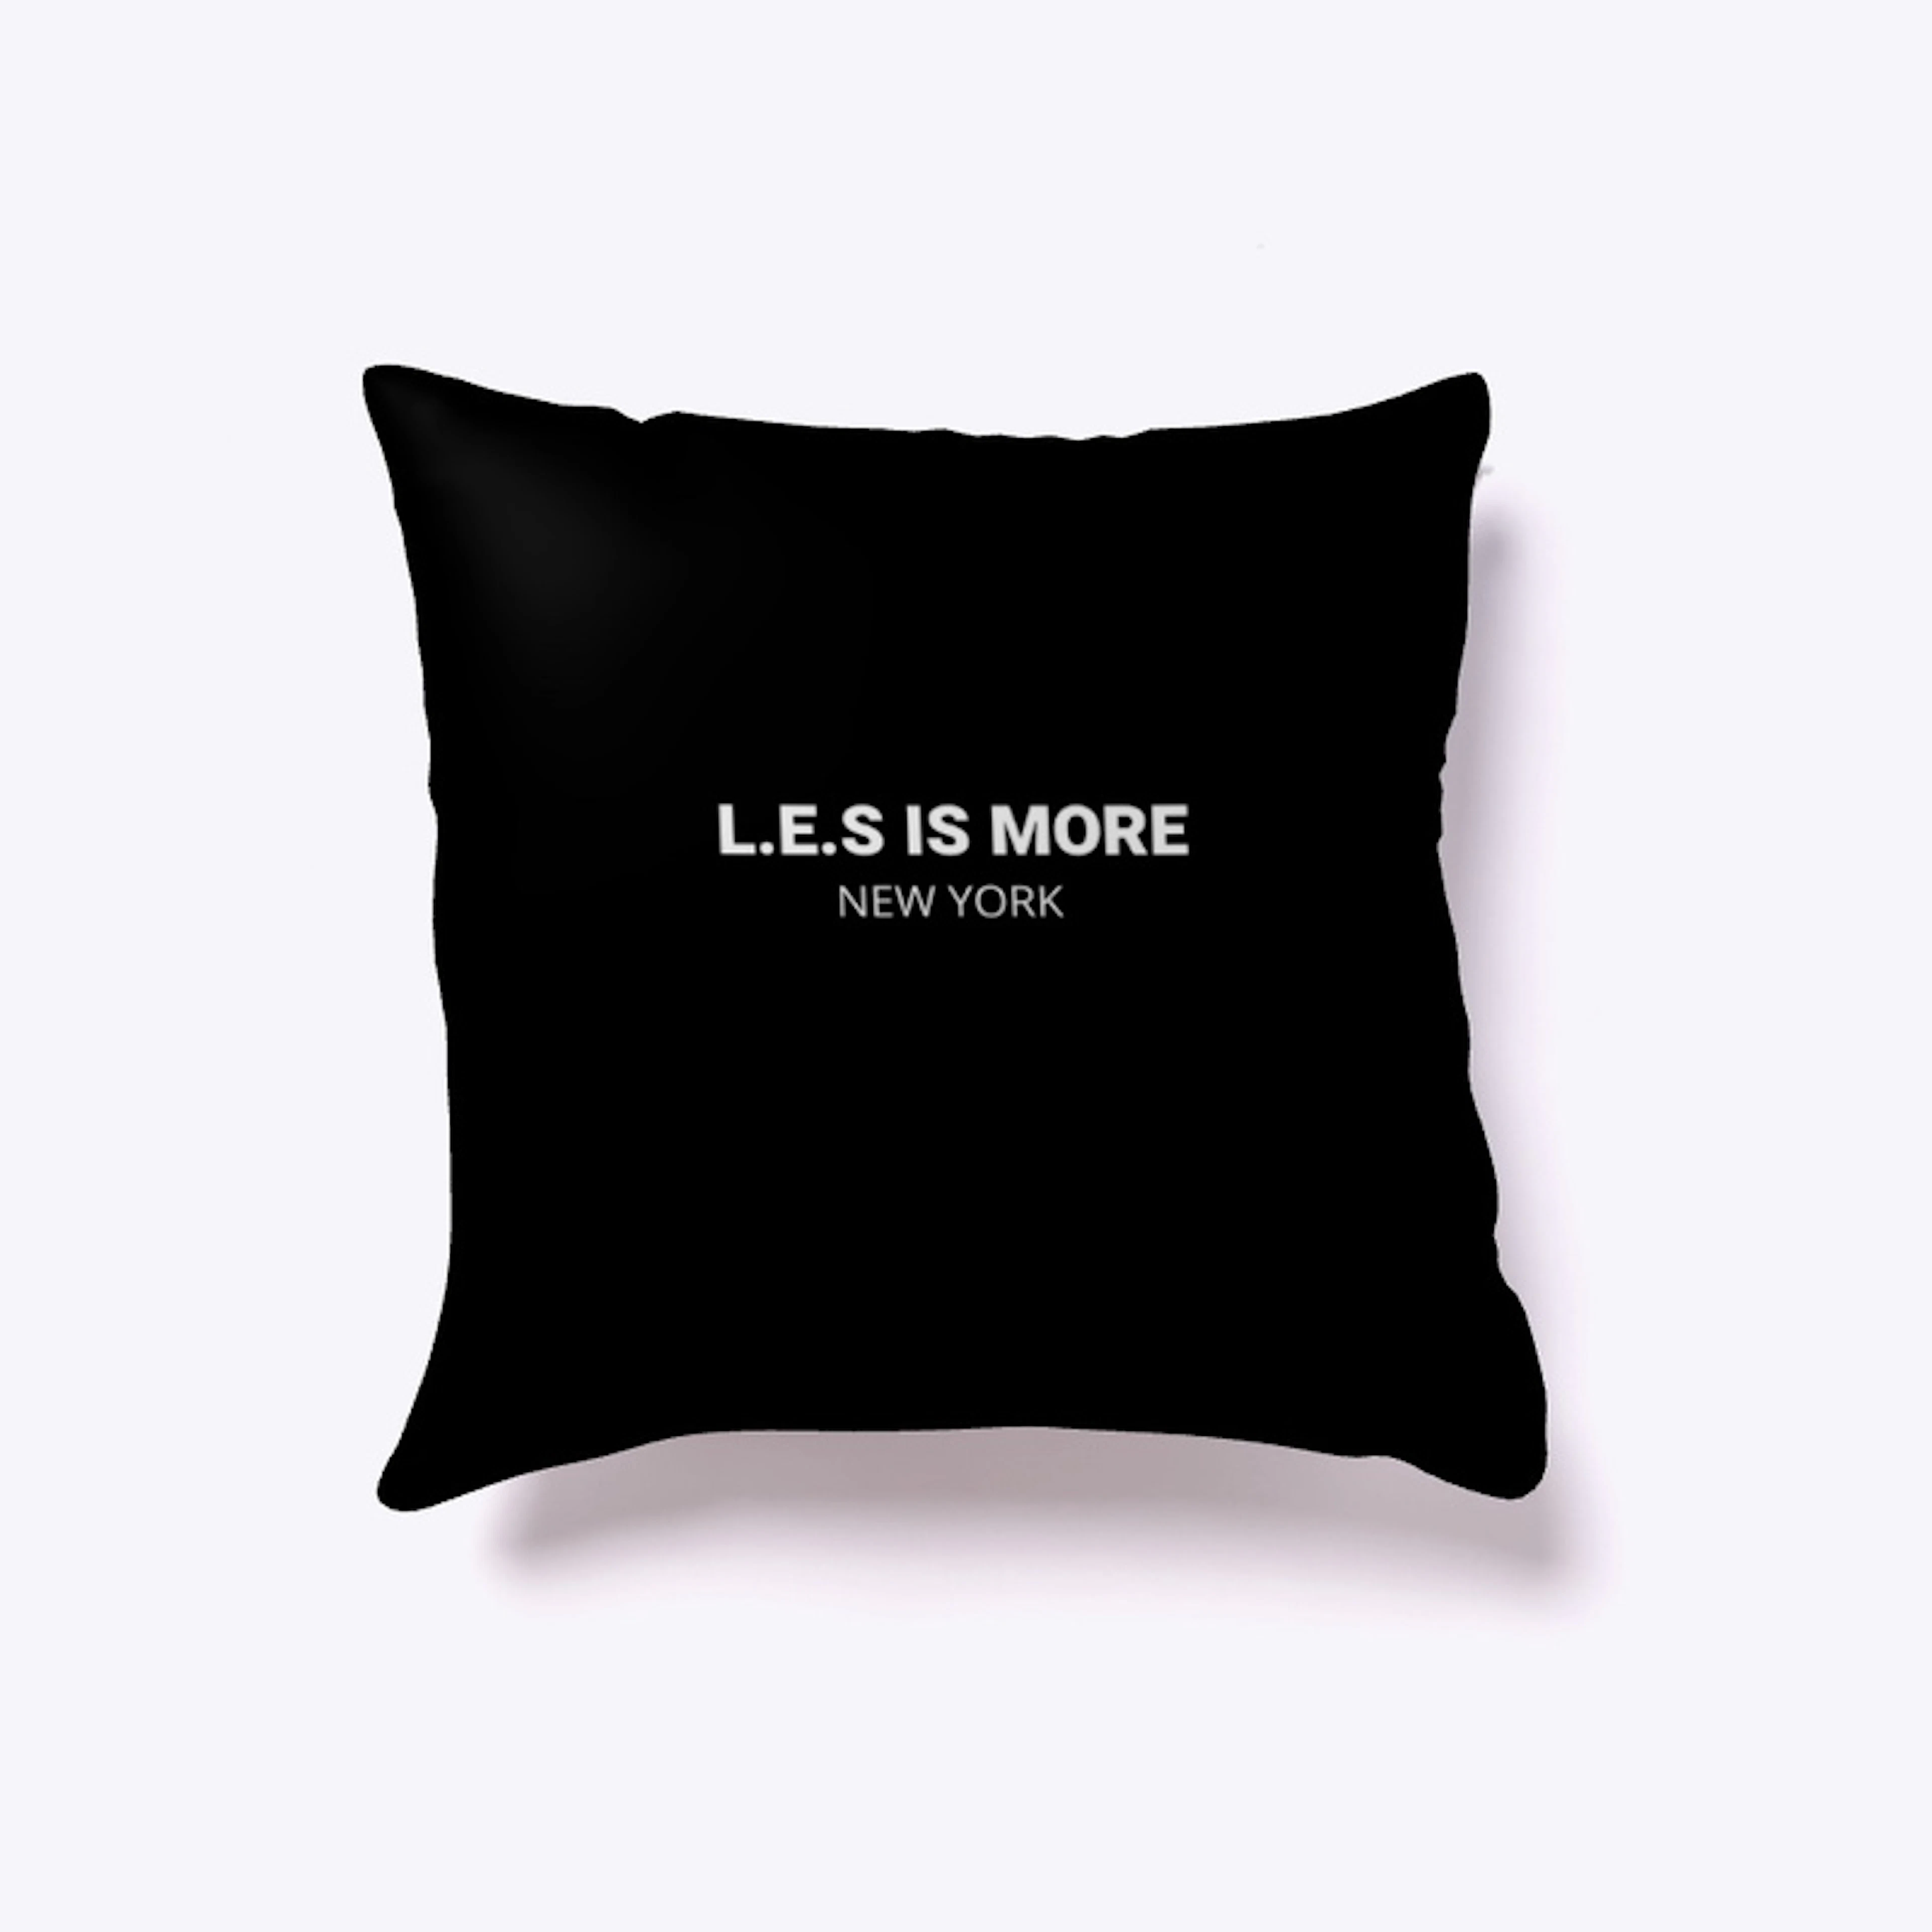 L.E.S IS MORE COMFORT PILLOW